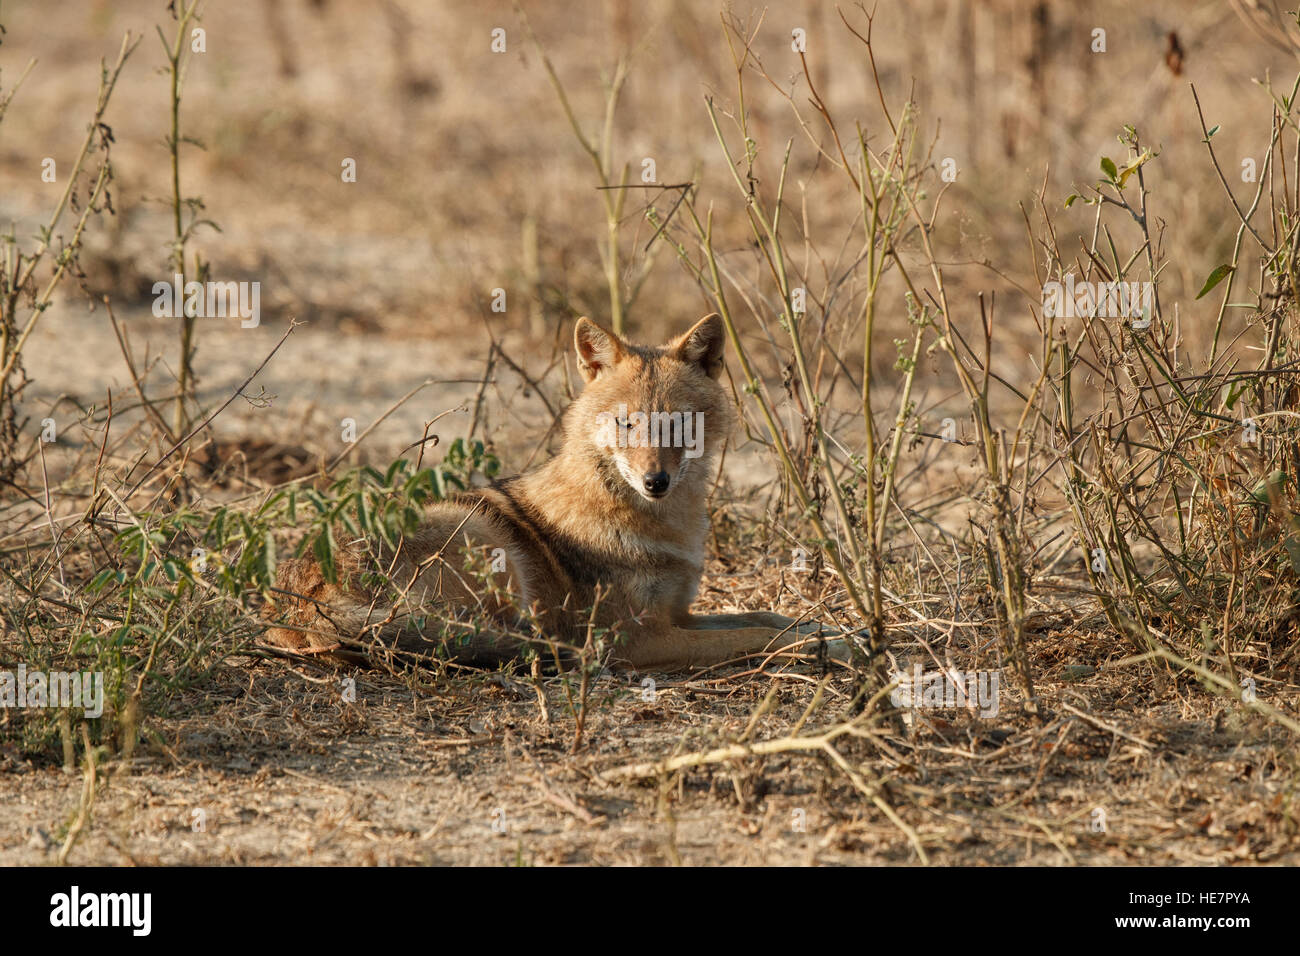 Indian jackals, Canis aureus indicus. Jackals on dusty in colorful morning light, staring directly at camera. Keoladeo National Stock Photo